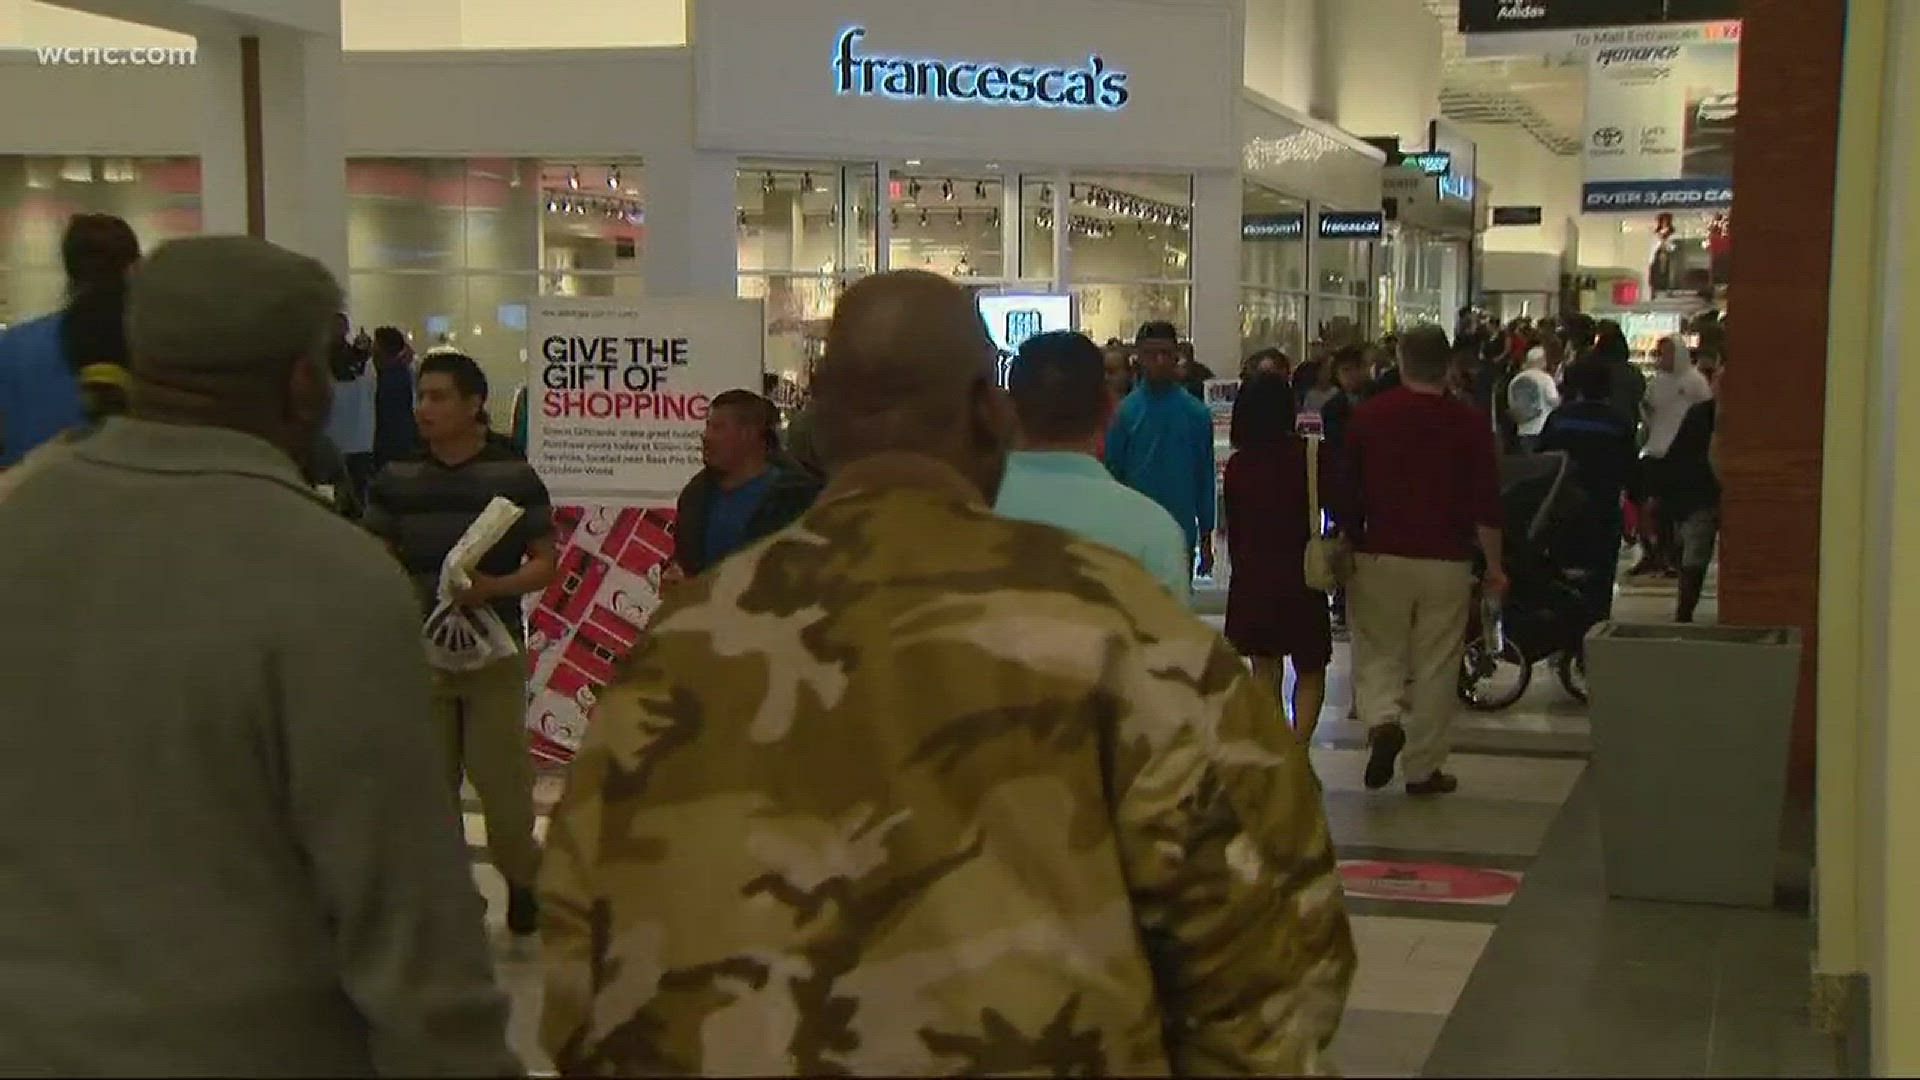 More than 126 million people are expected to pack shopping centers throughout the country during "Super Saturday," the last full Saturday before Christmas.